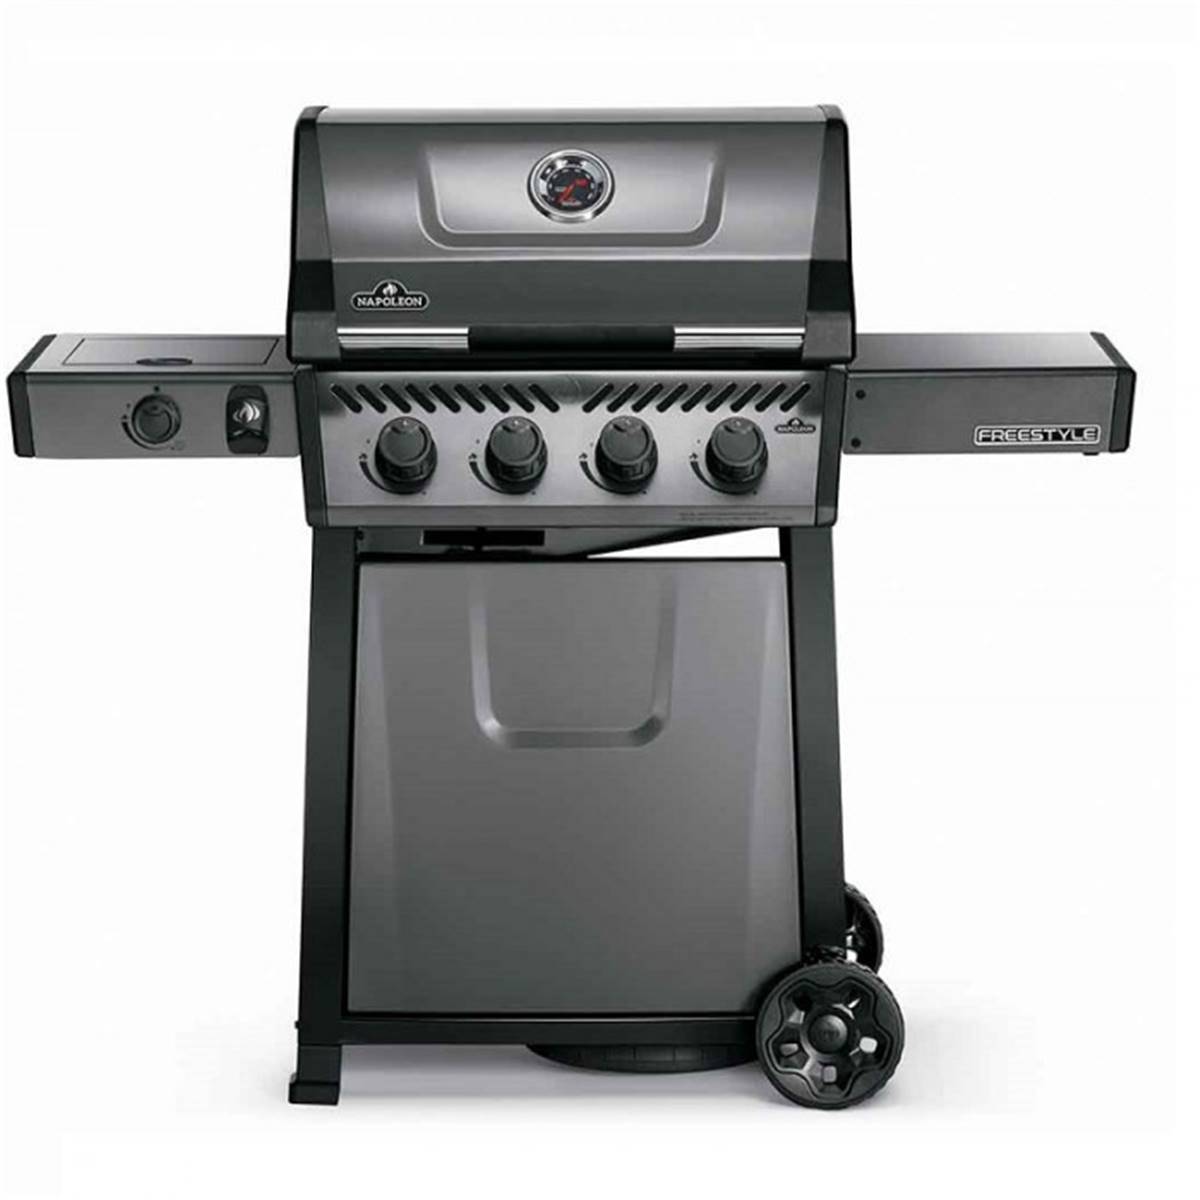 barbecue-gaz-napol-on-freestyle-425-4-br-leurs-barbecue-france